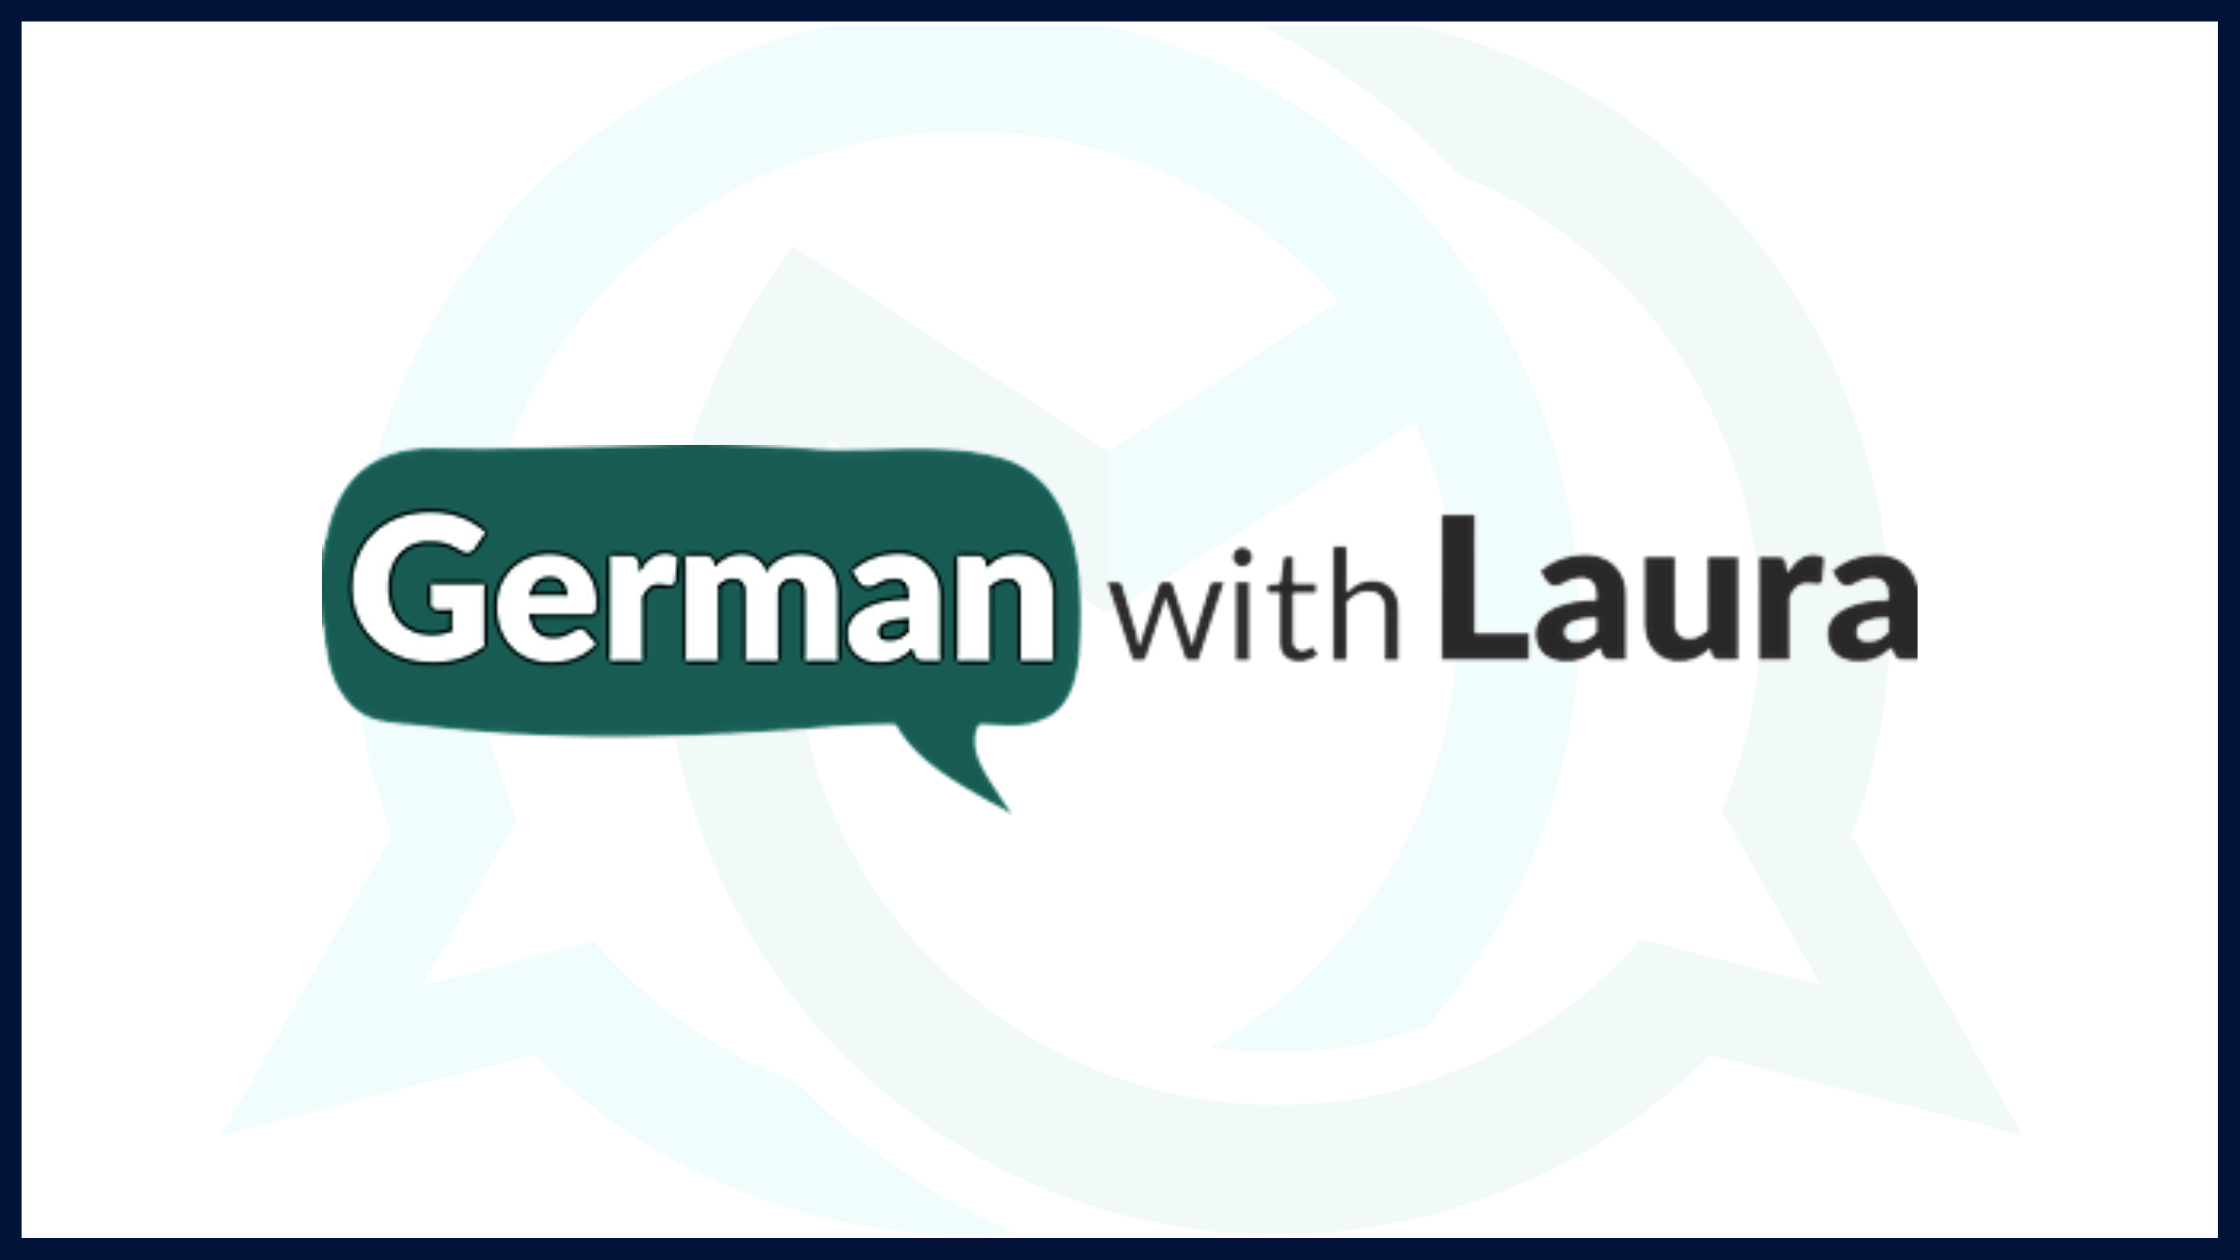 German with Laura logo